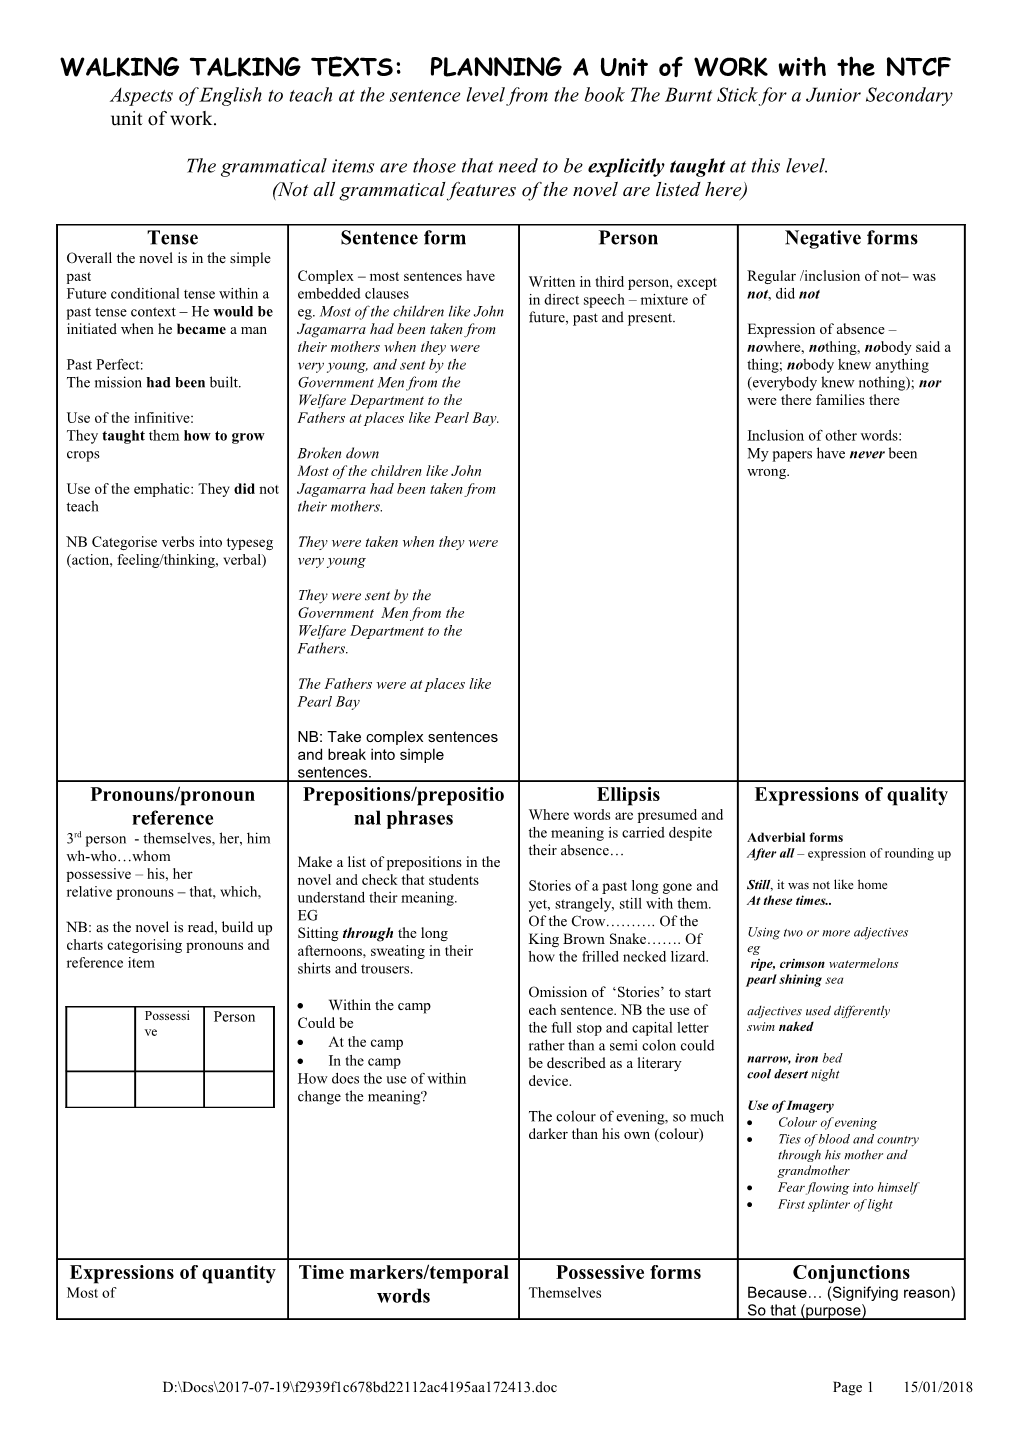 WALKING TALKING TEXTS: PLANNING a Unit of WORK with the NTCF